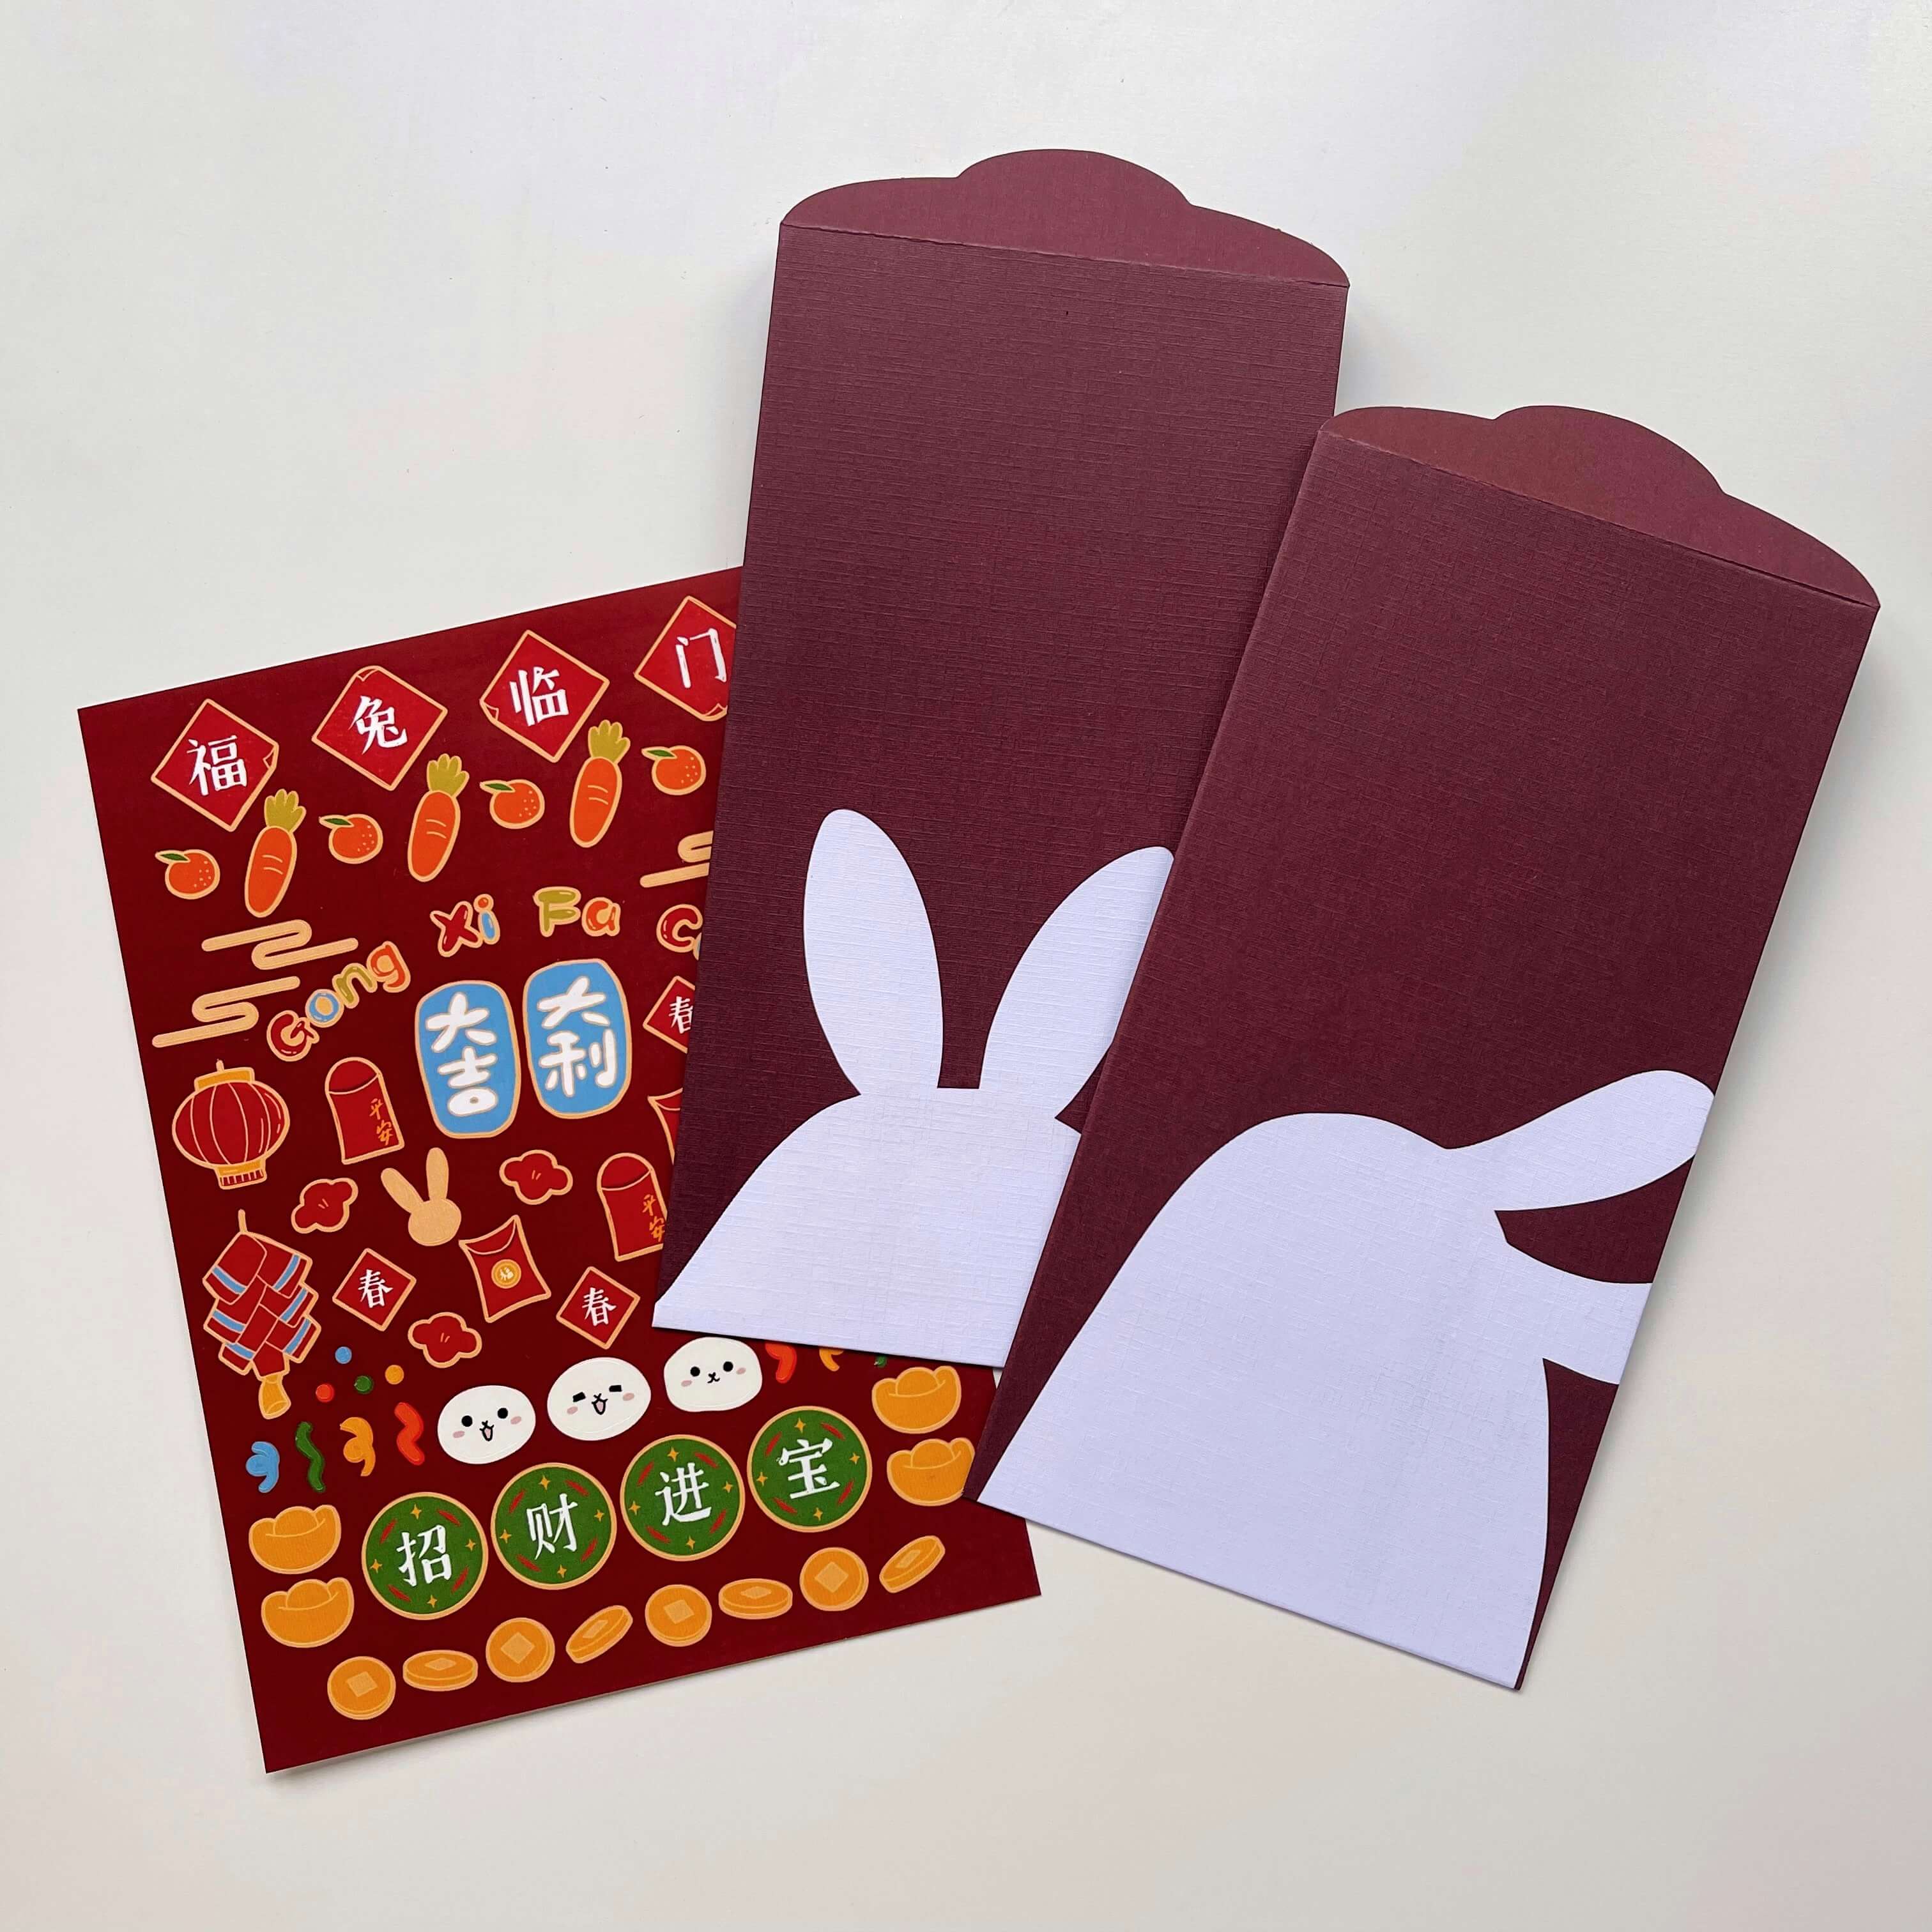 Glossy red and gold Chinese money envelopes for Lunar New Year and